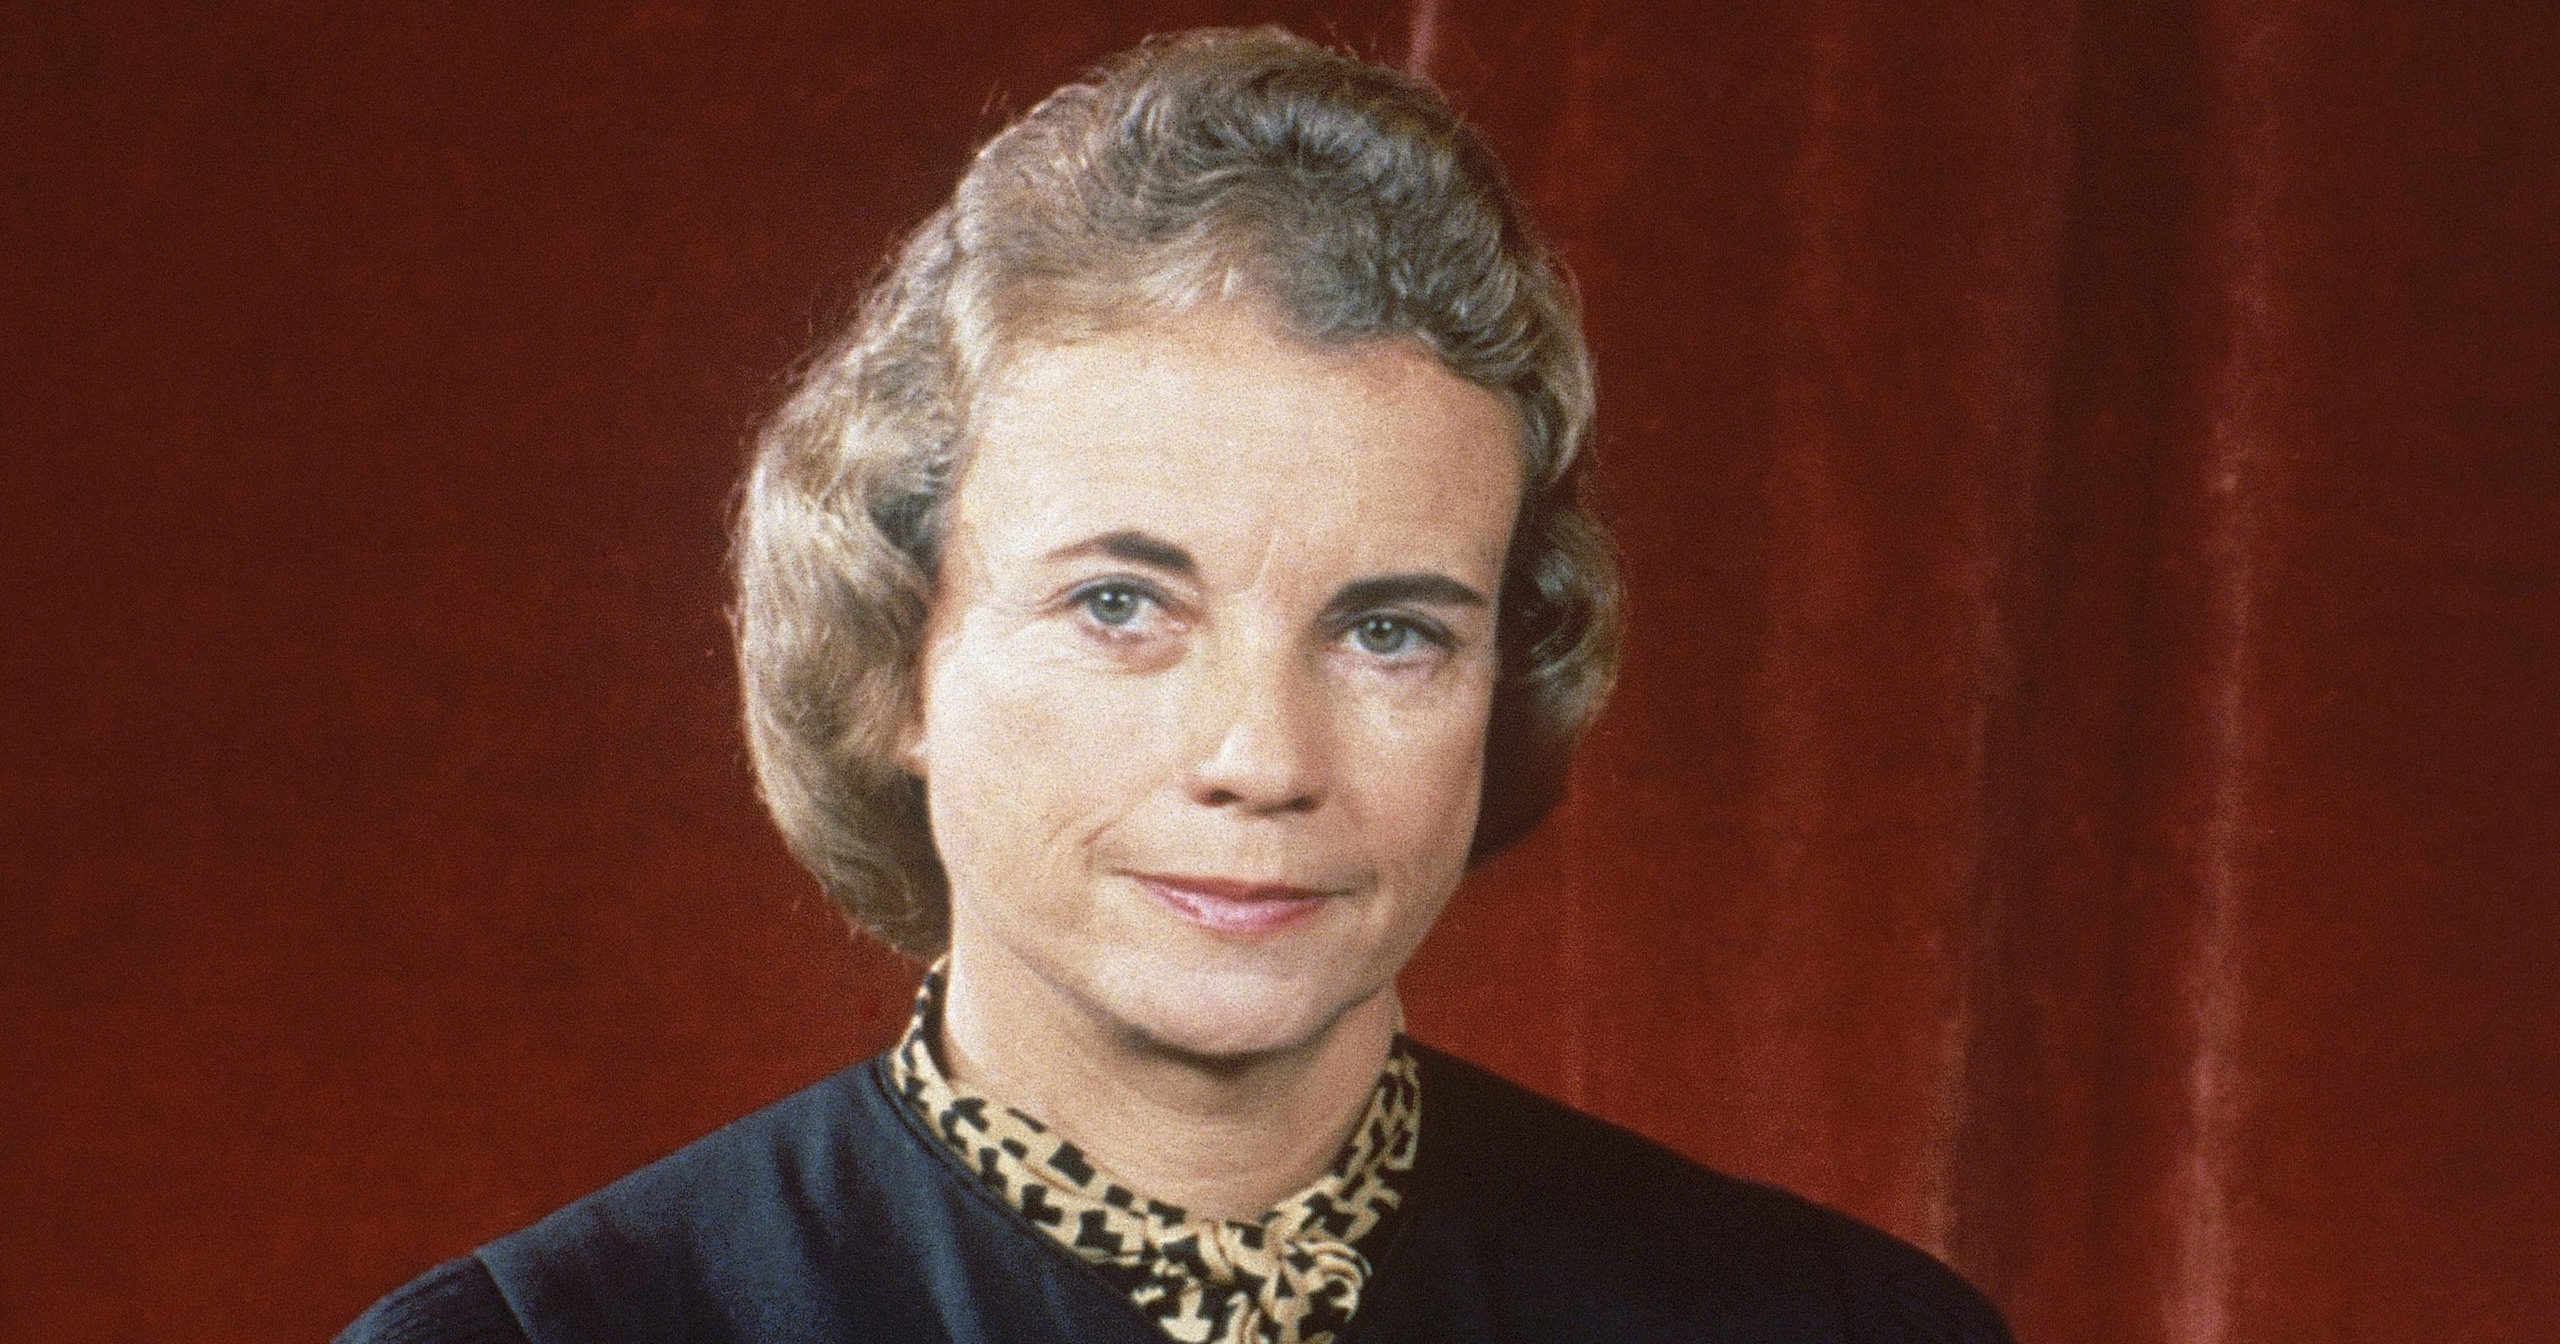 Supreme Court Associate Justice Sandra Day O’Connor poses for a photo in 1982. O’Connor who joined the Supreme Court in 1981 as the nation’s first female justice, has died at age 93.